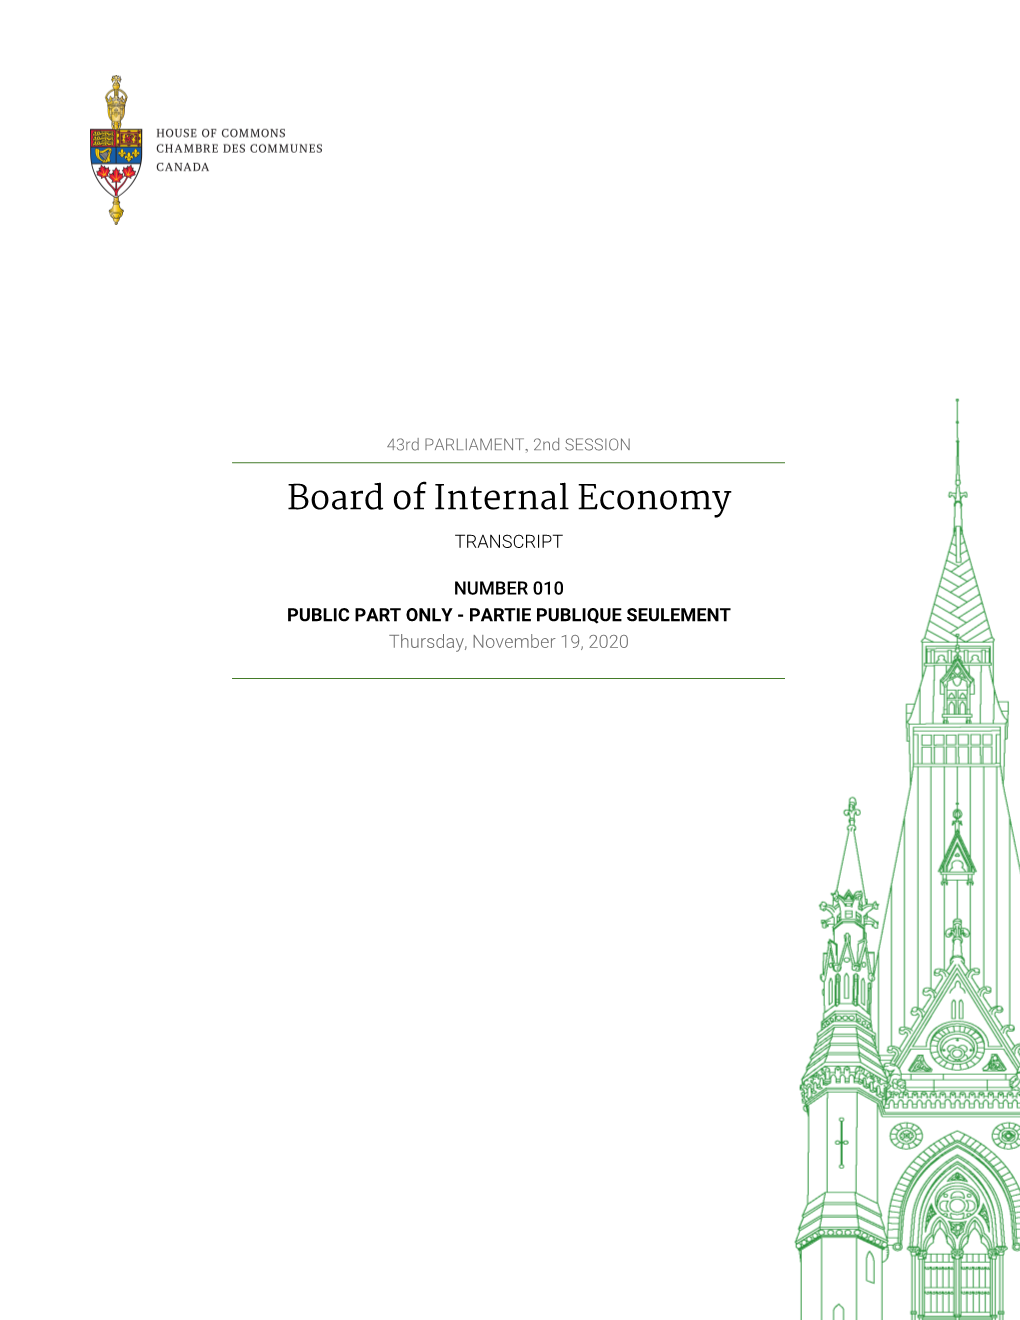 Evidence of the Board of Internal Economy